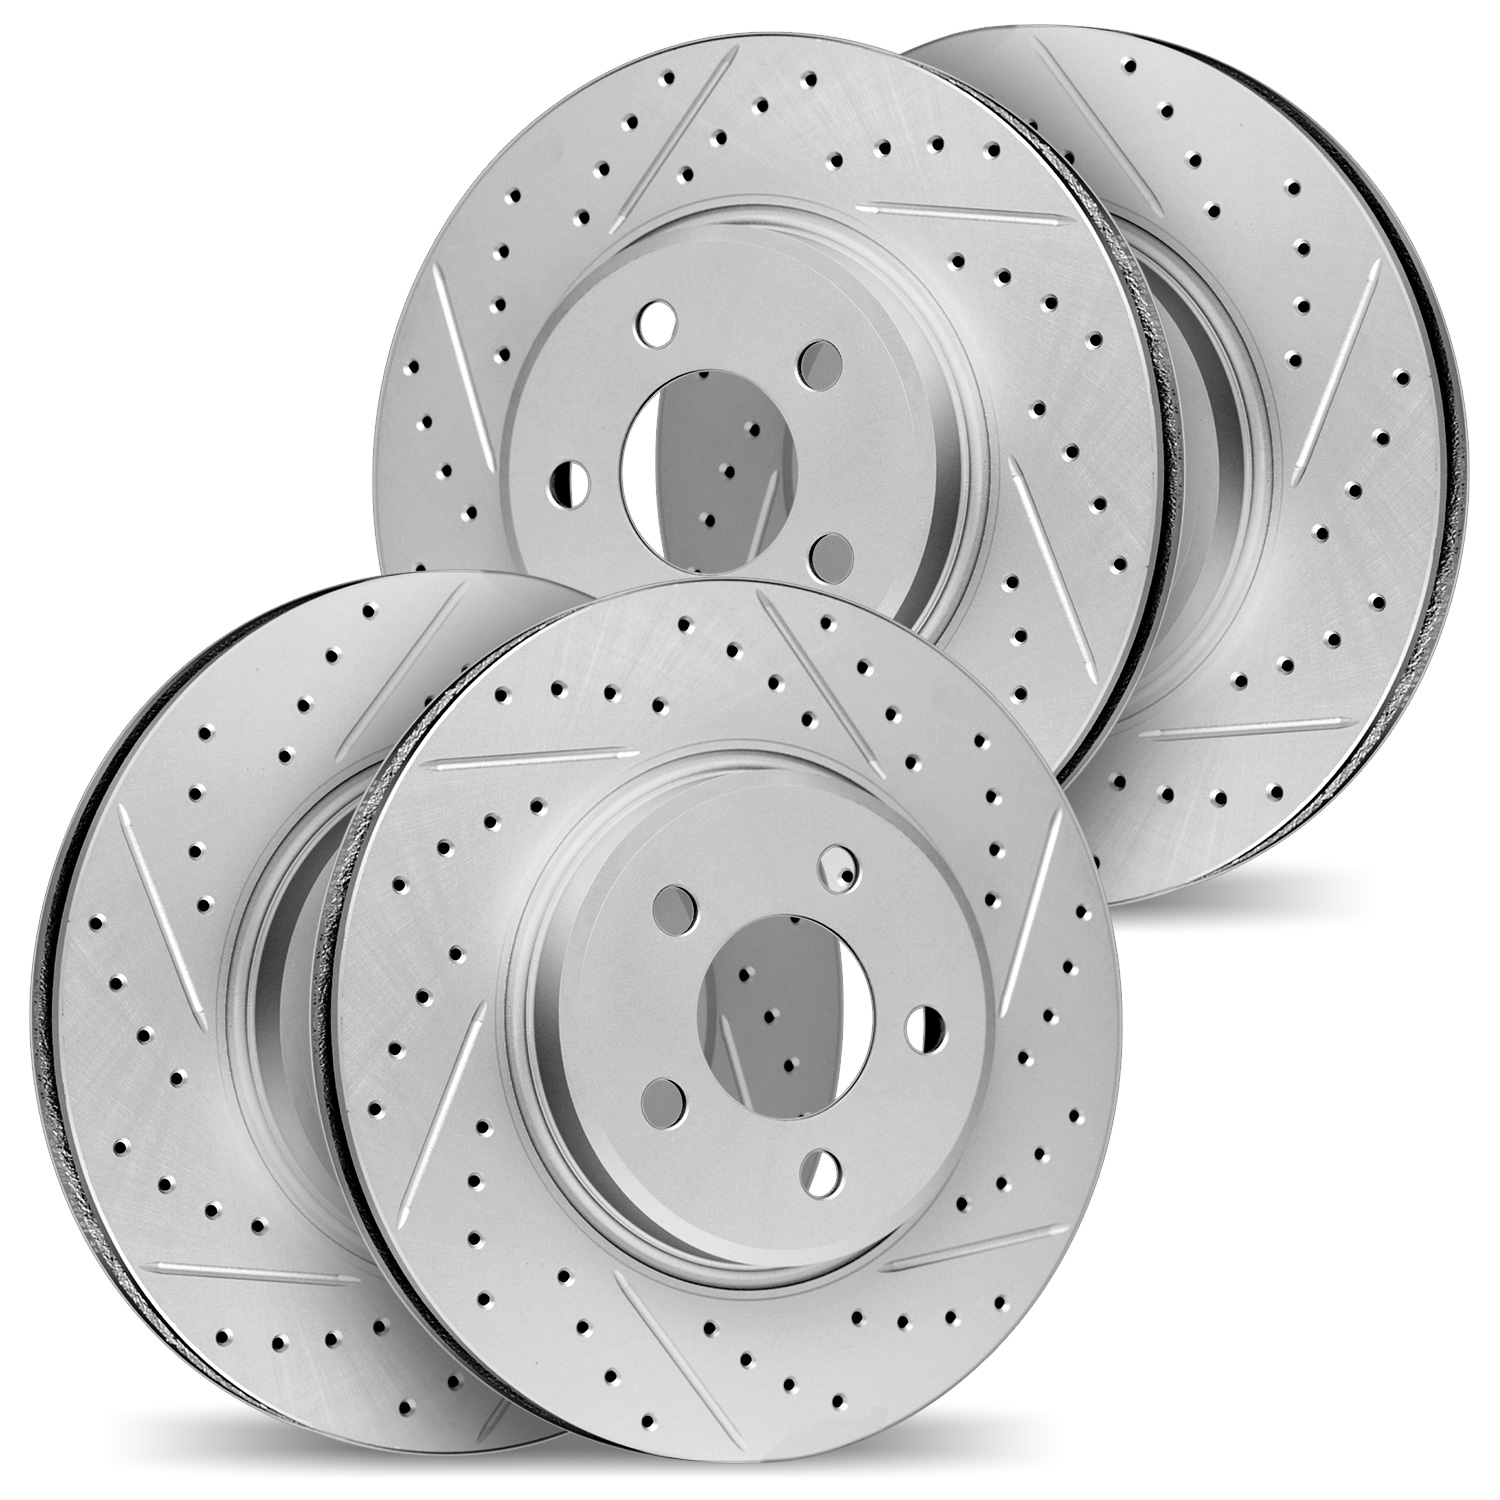 2004-75006 Geoperformance Drilled/Slotted Brake Rotors, 2006-2015 Lexus/Toyota/Scion, Position: Front and Rear